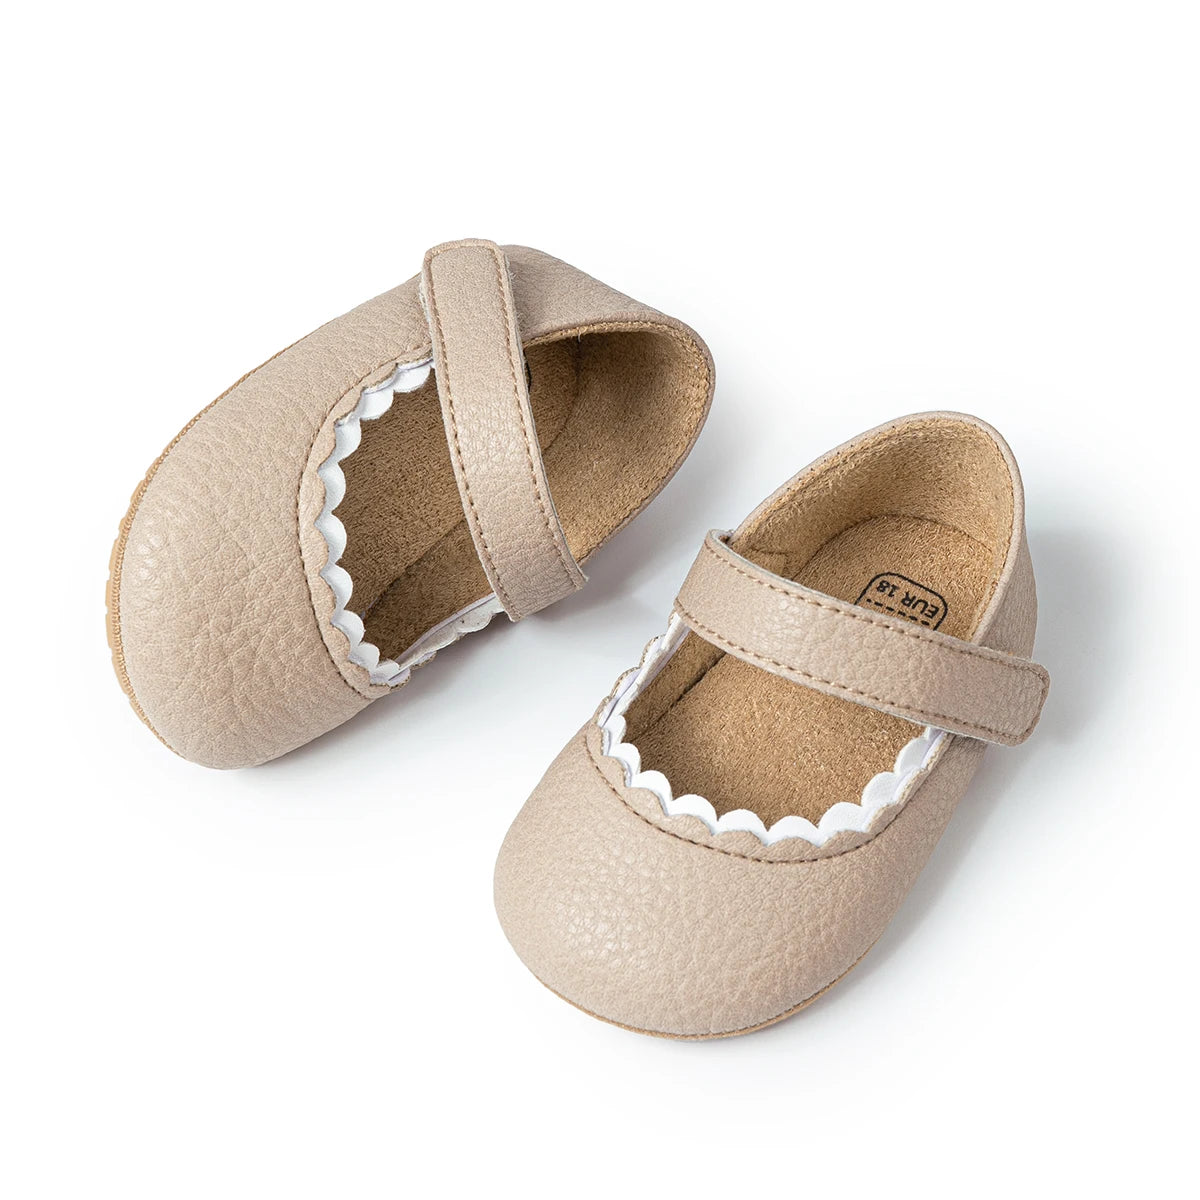 Princess Toddler Shoes - Soft Soled Non-Slip for First Walkers 0-18M